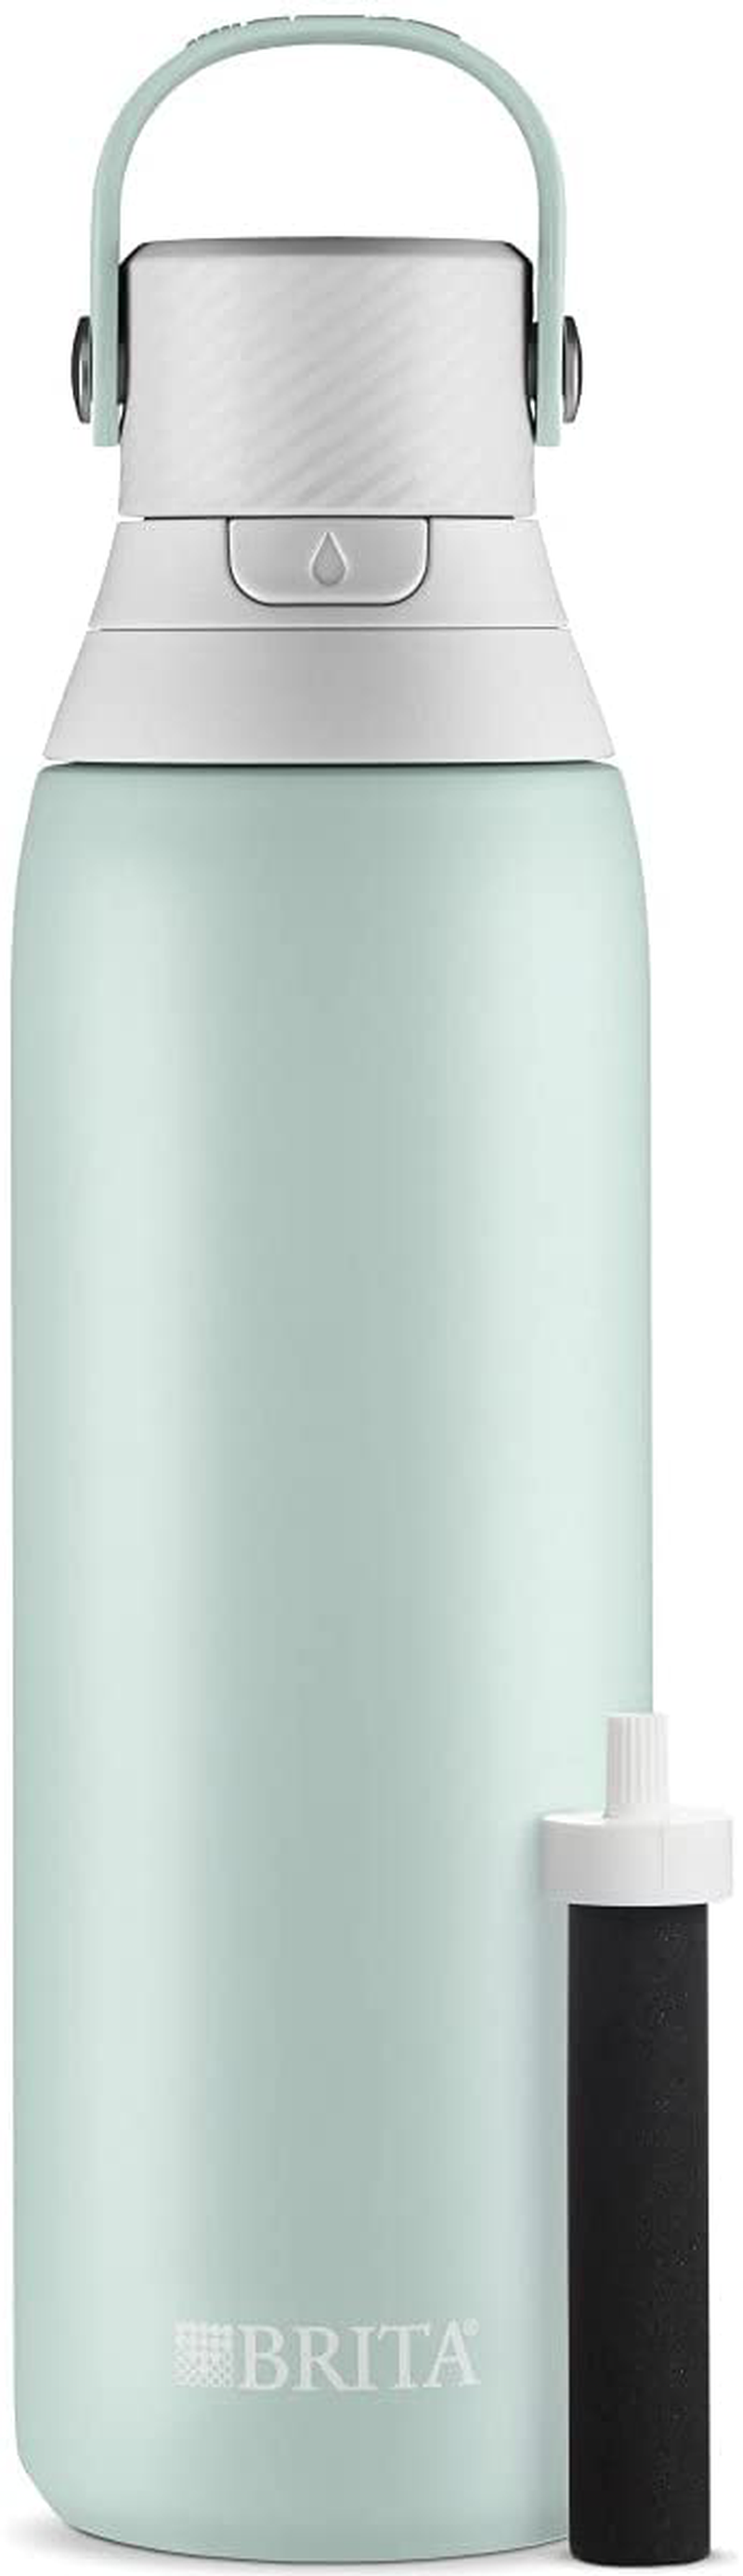 Brita Stainless Steel Water Filter Bottle, Stainless Steel, 20 Ounce, 1 Count